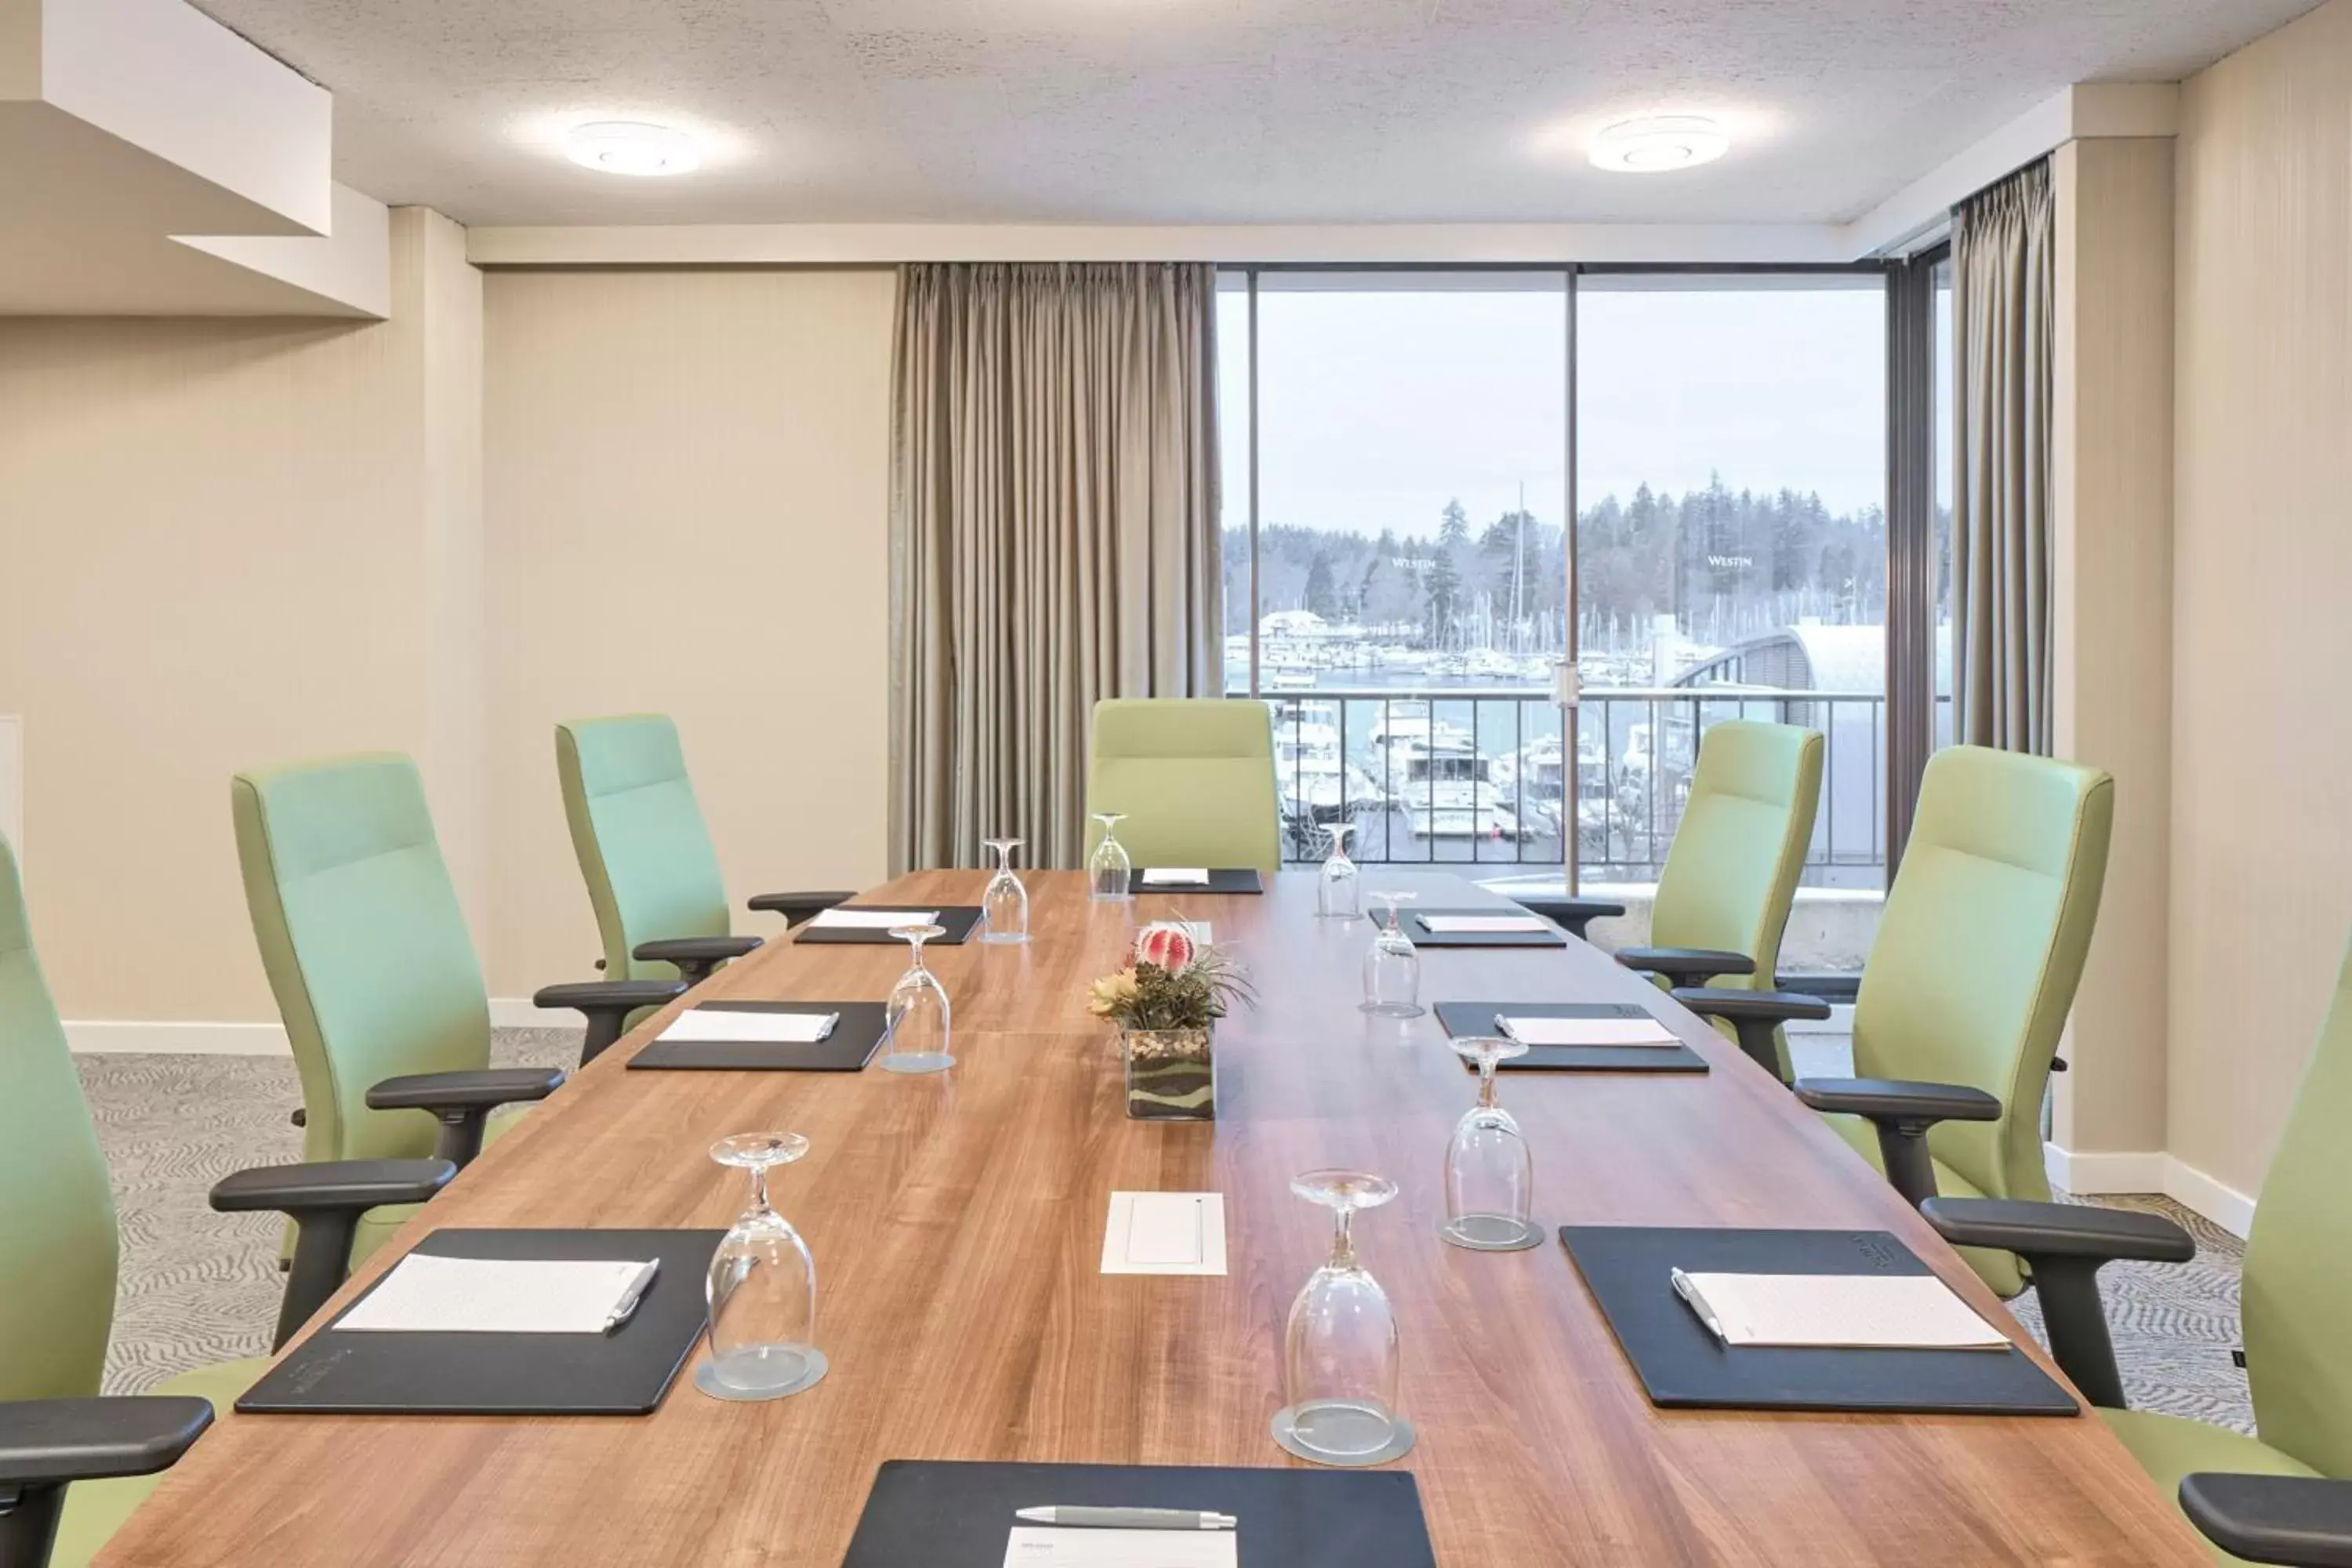 Meeting/conference room in The Westin Bayshore, Vancouver